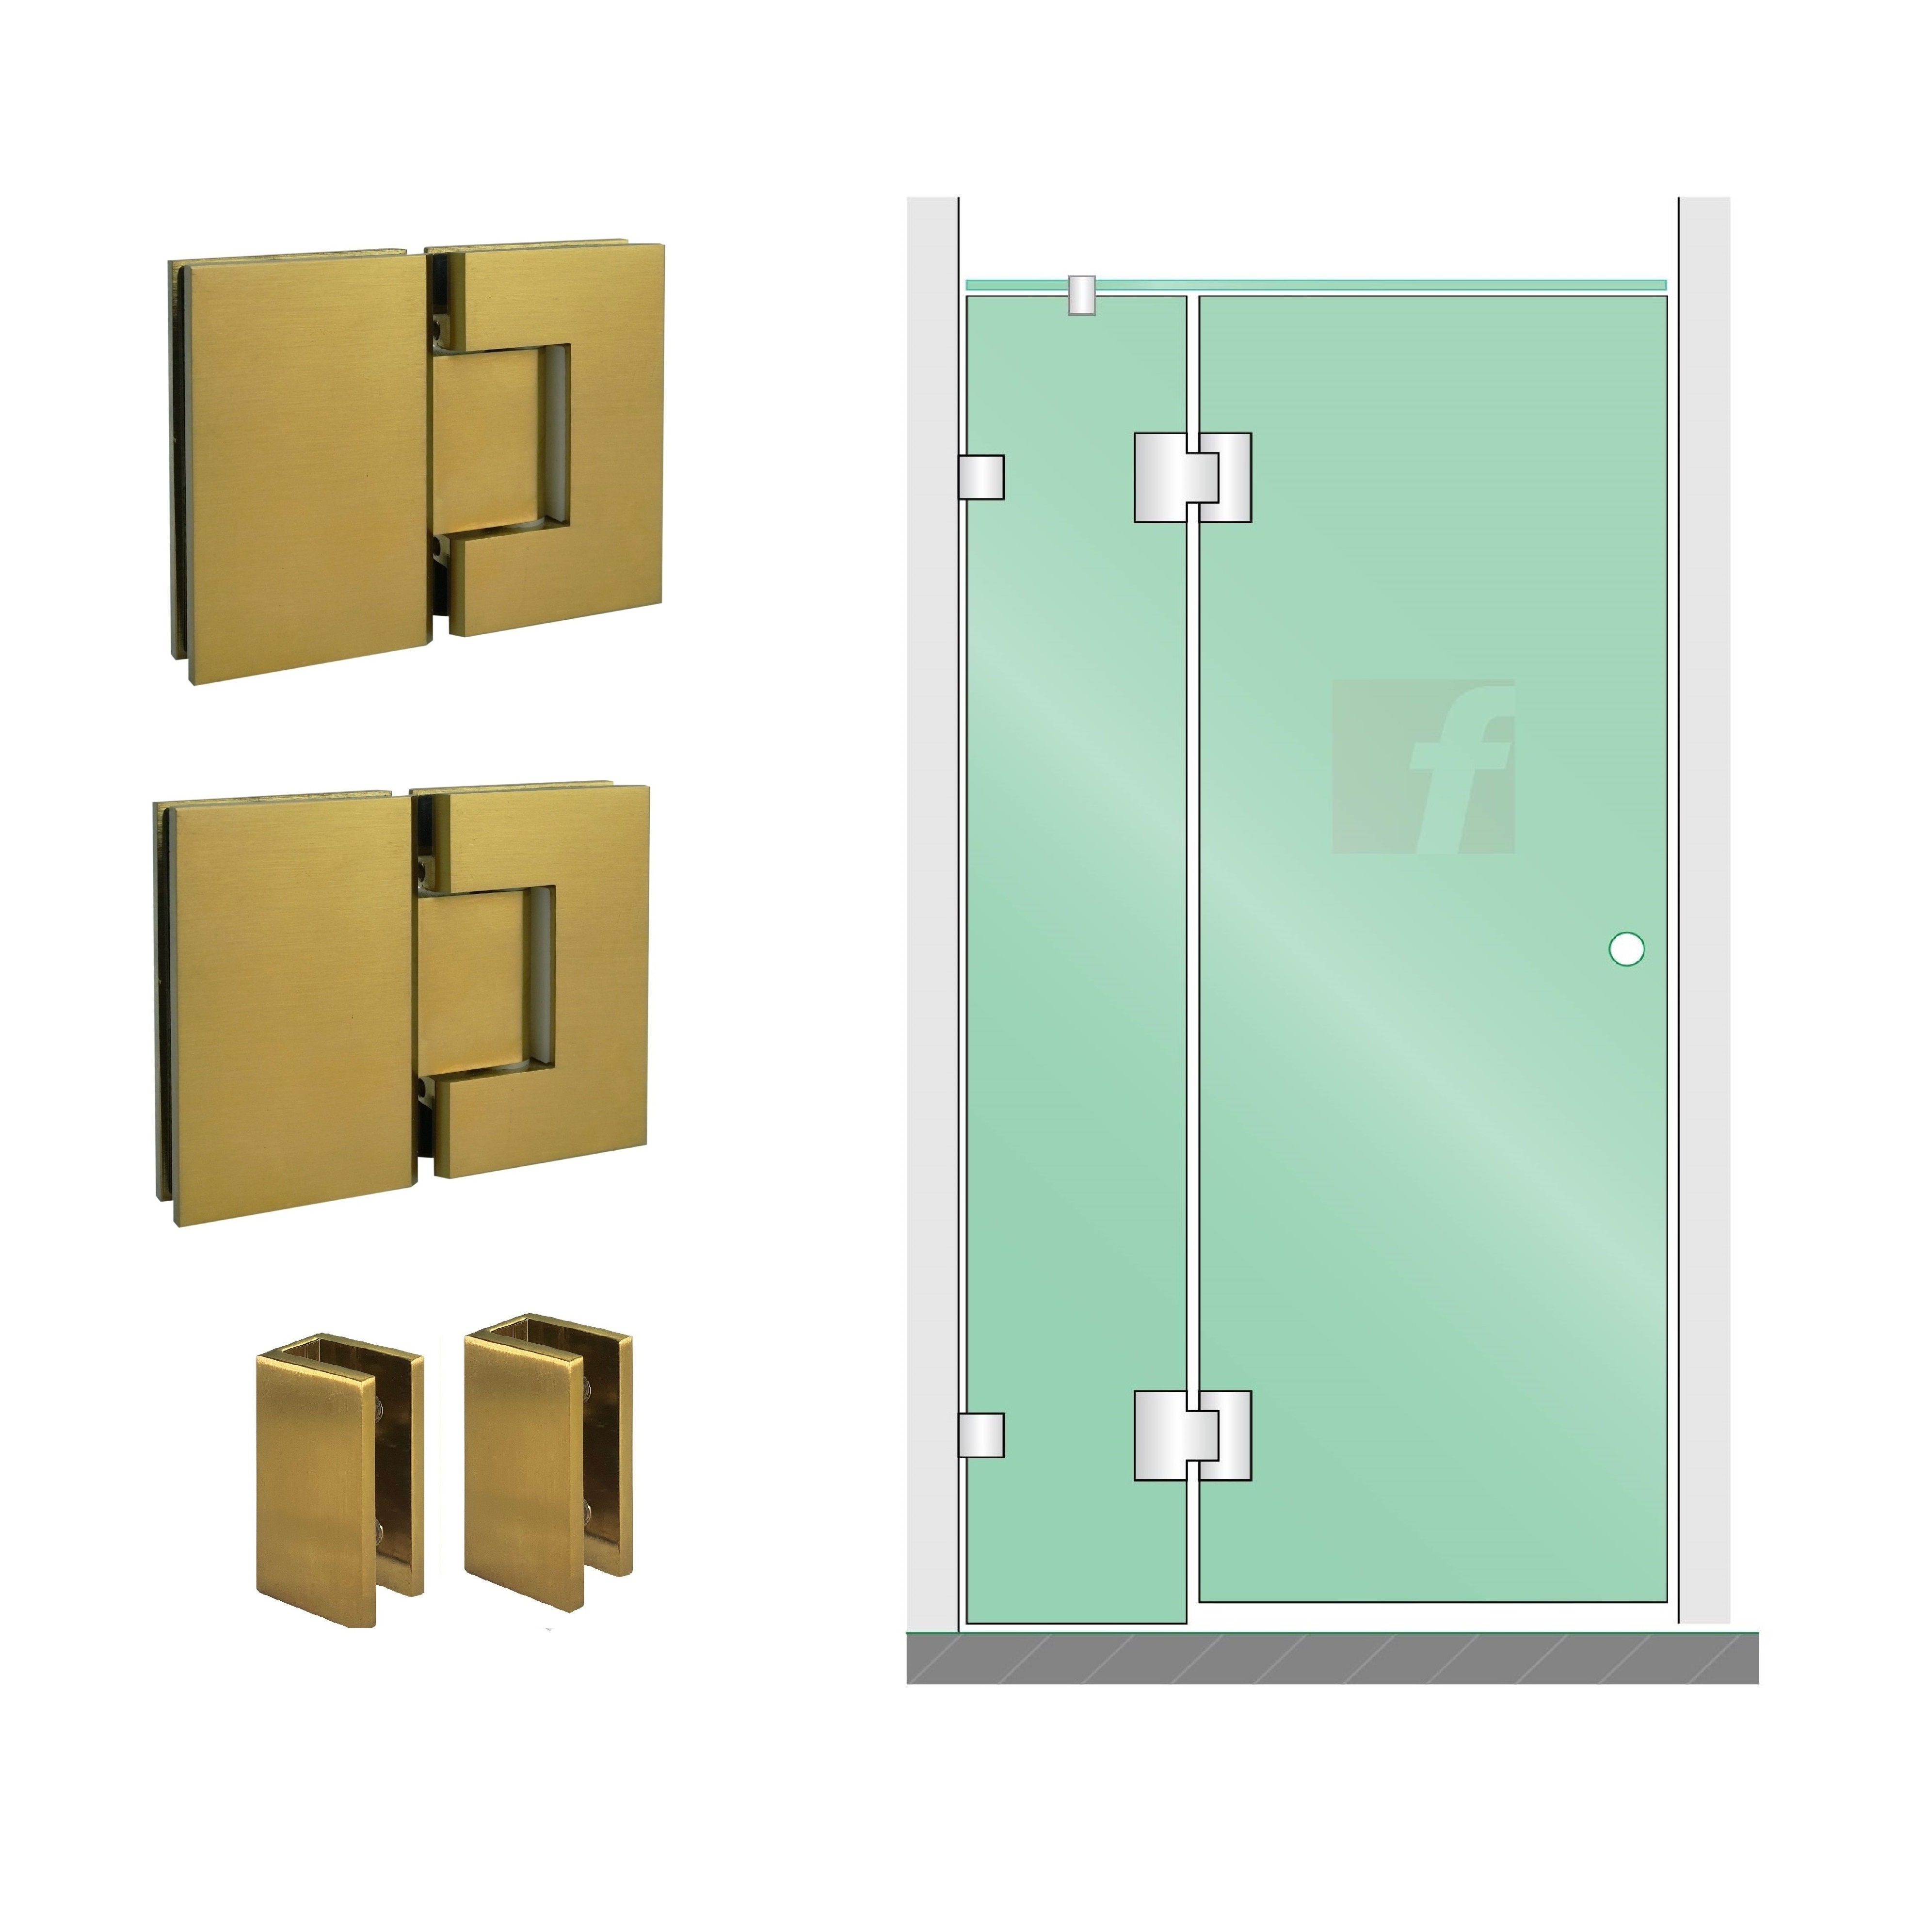 2 PANEL A (IN-LINE) WITH BRUSHED BRASS HARDWARE